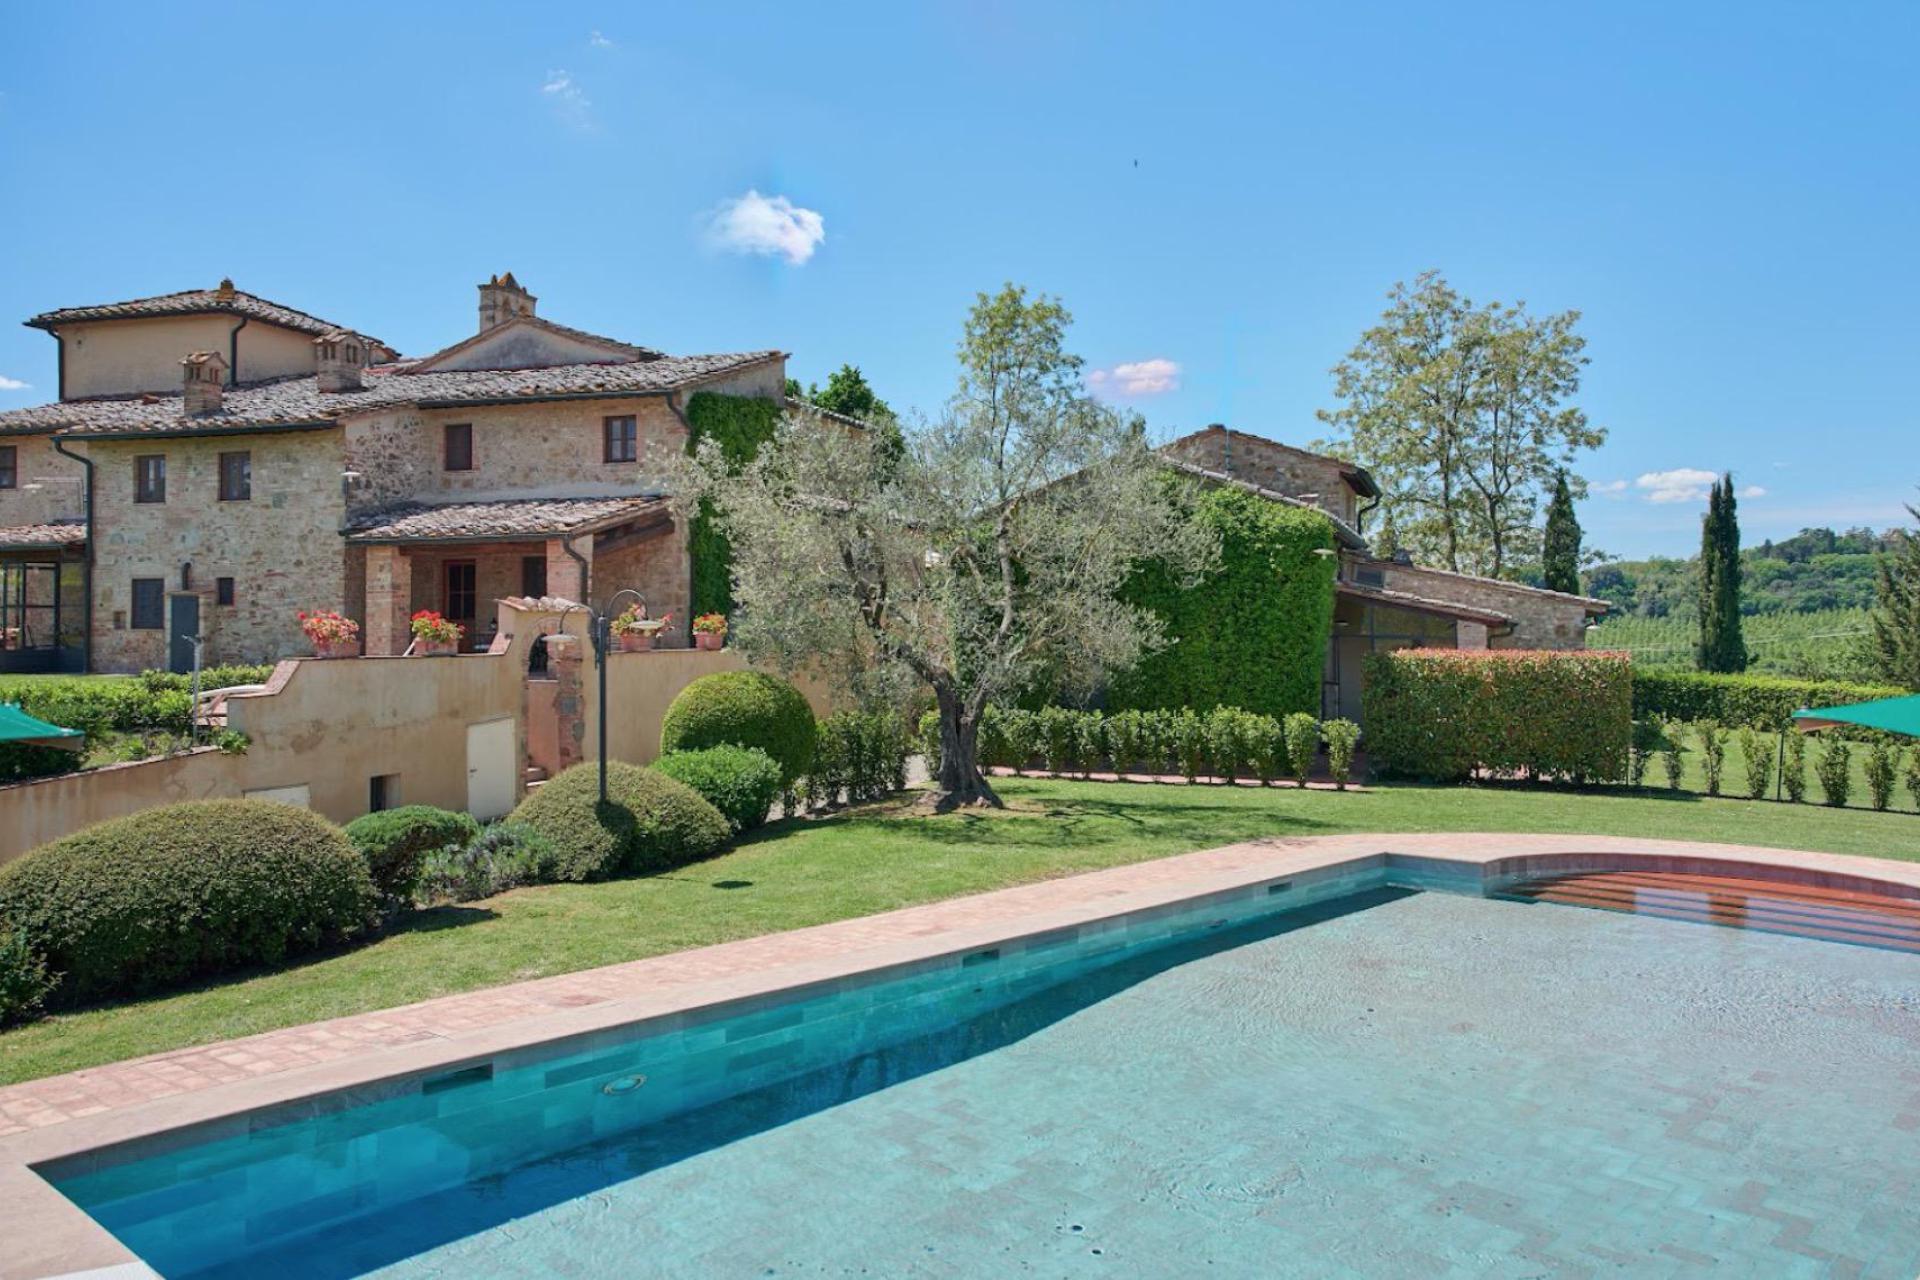 Stylish and authentic agriturismo in the Chianti region